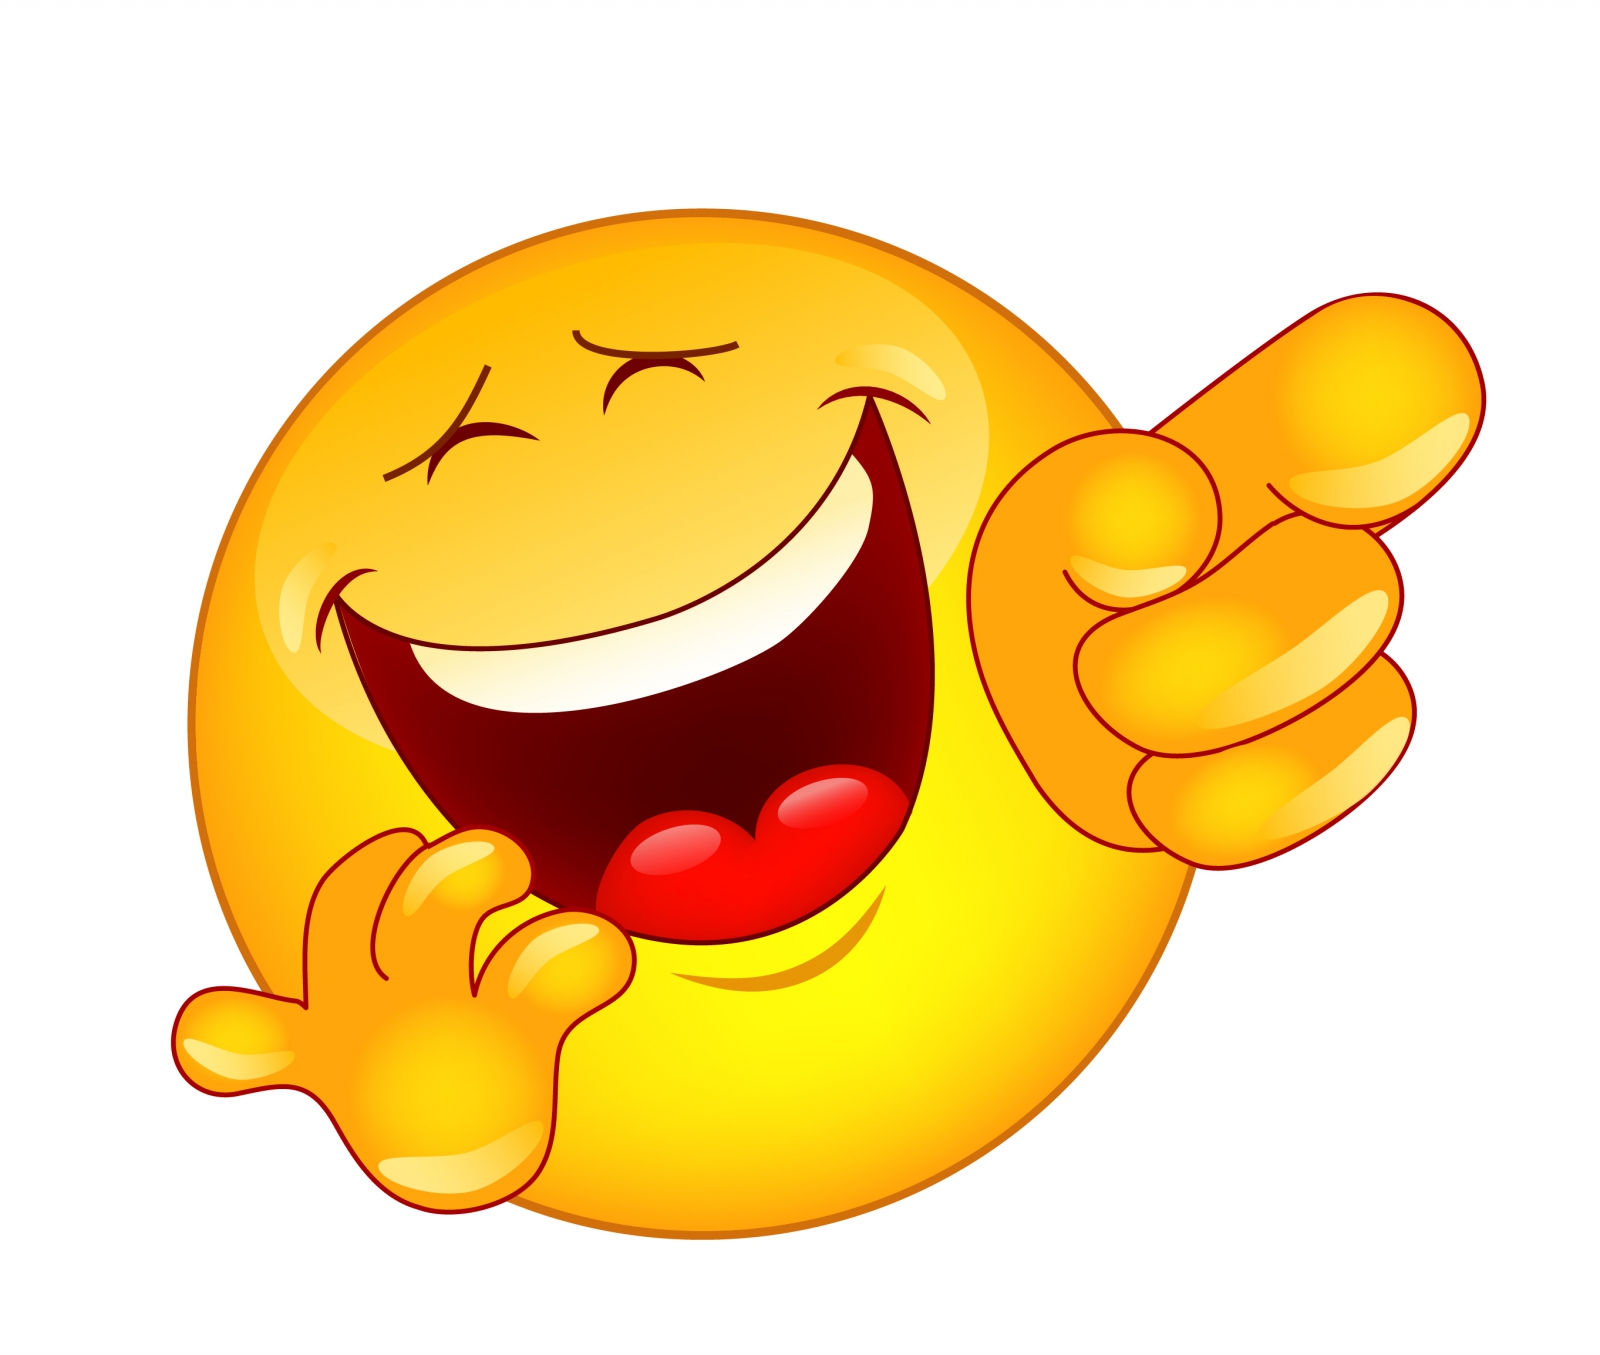 laughter clipart